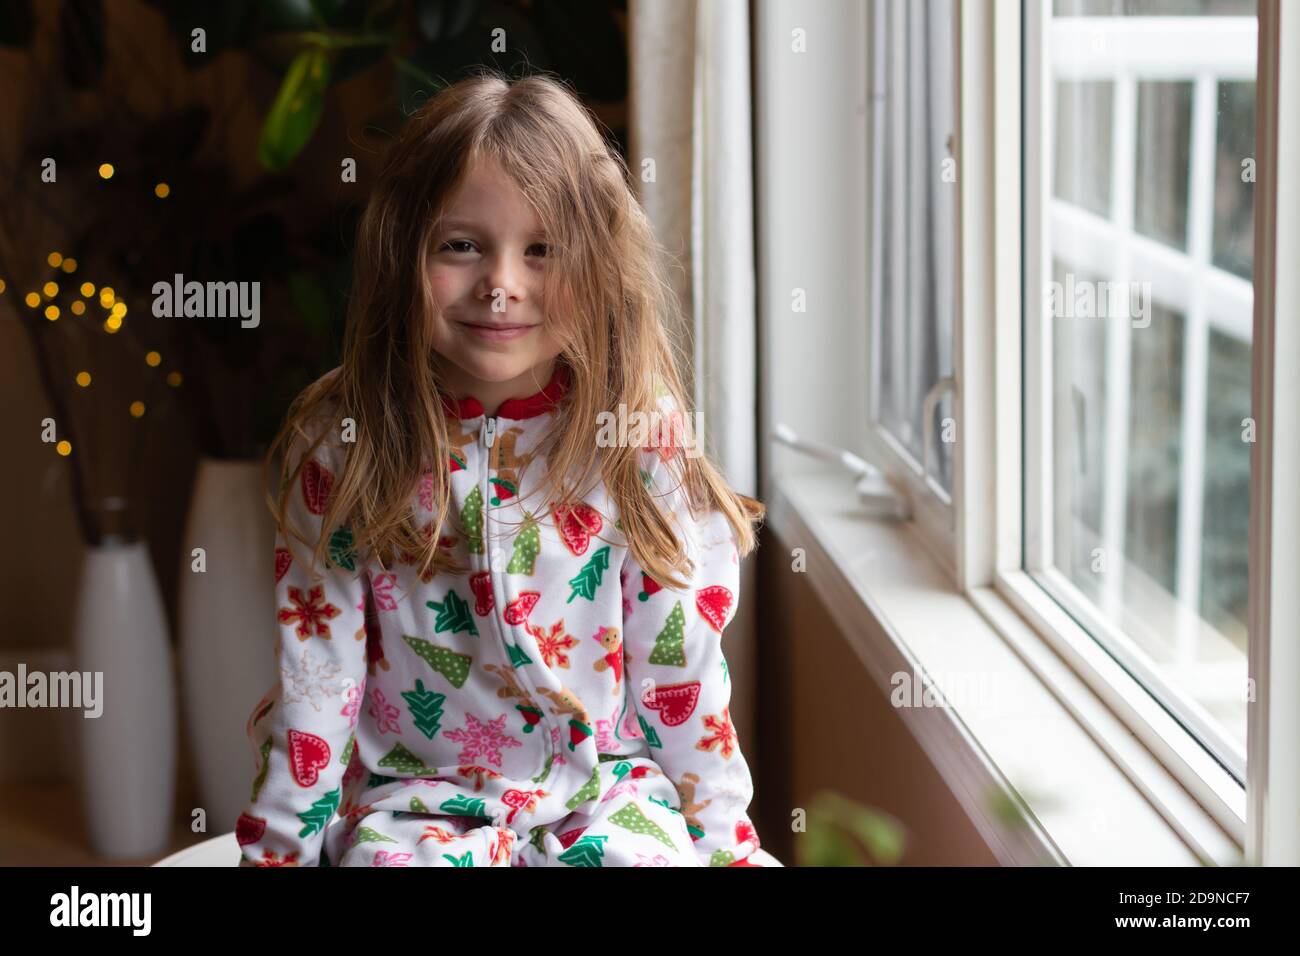 Young girl looking at camera wearing Christmas pyjamas sitting by window Stock Photo